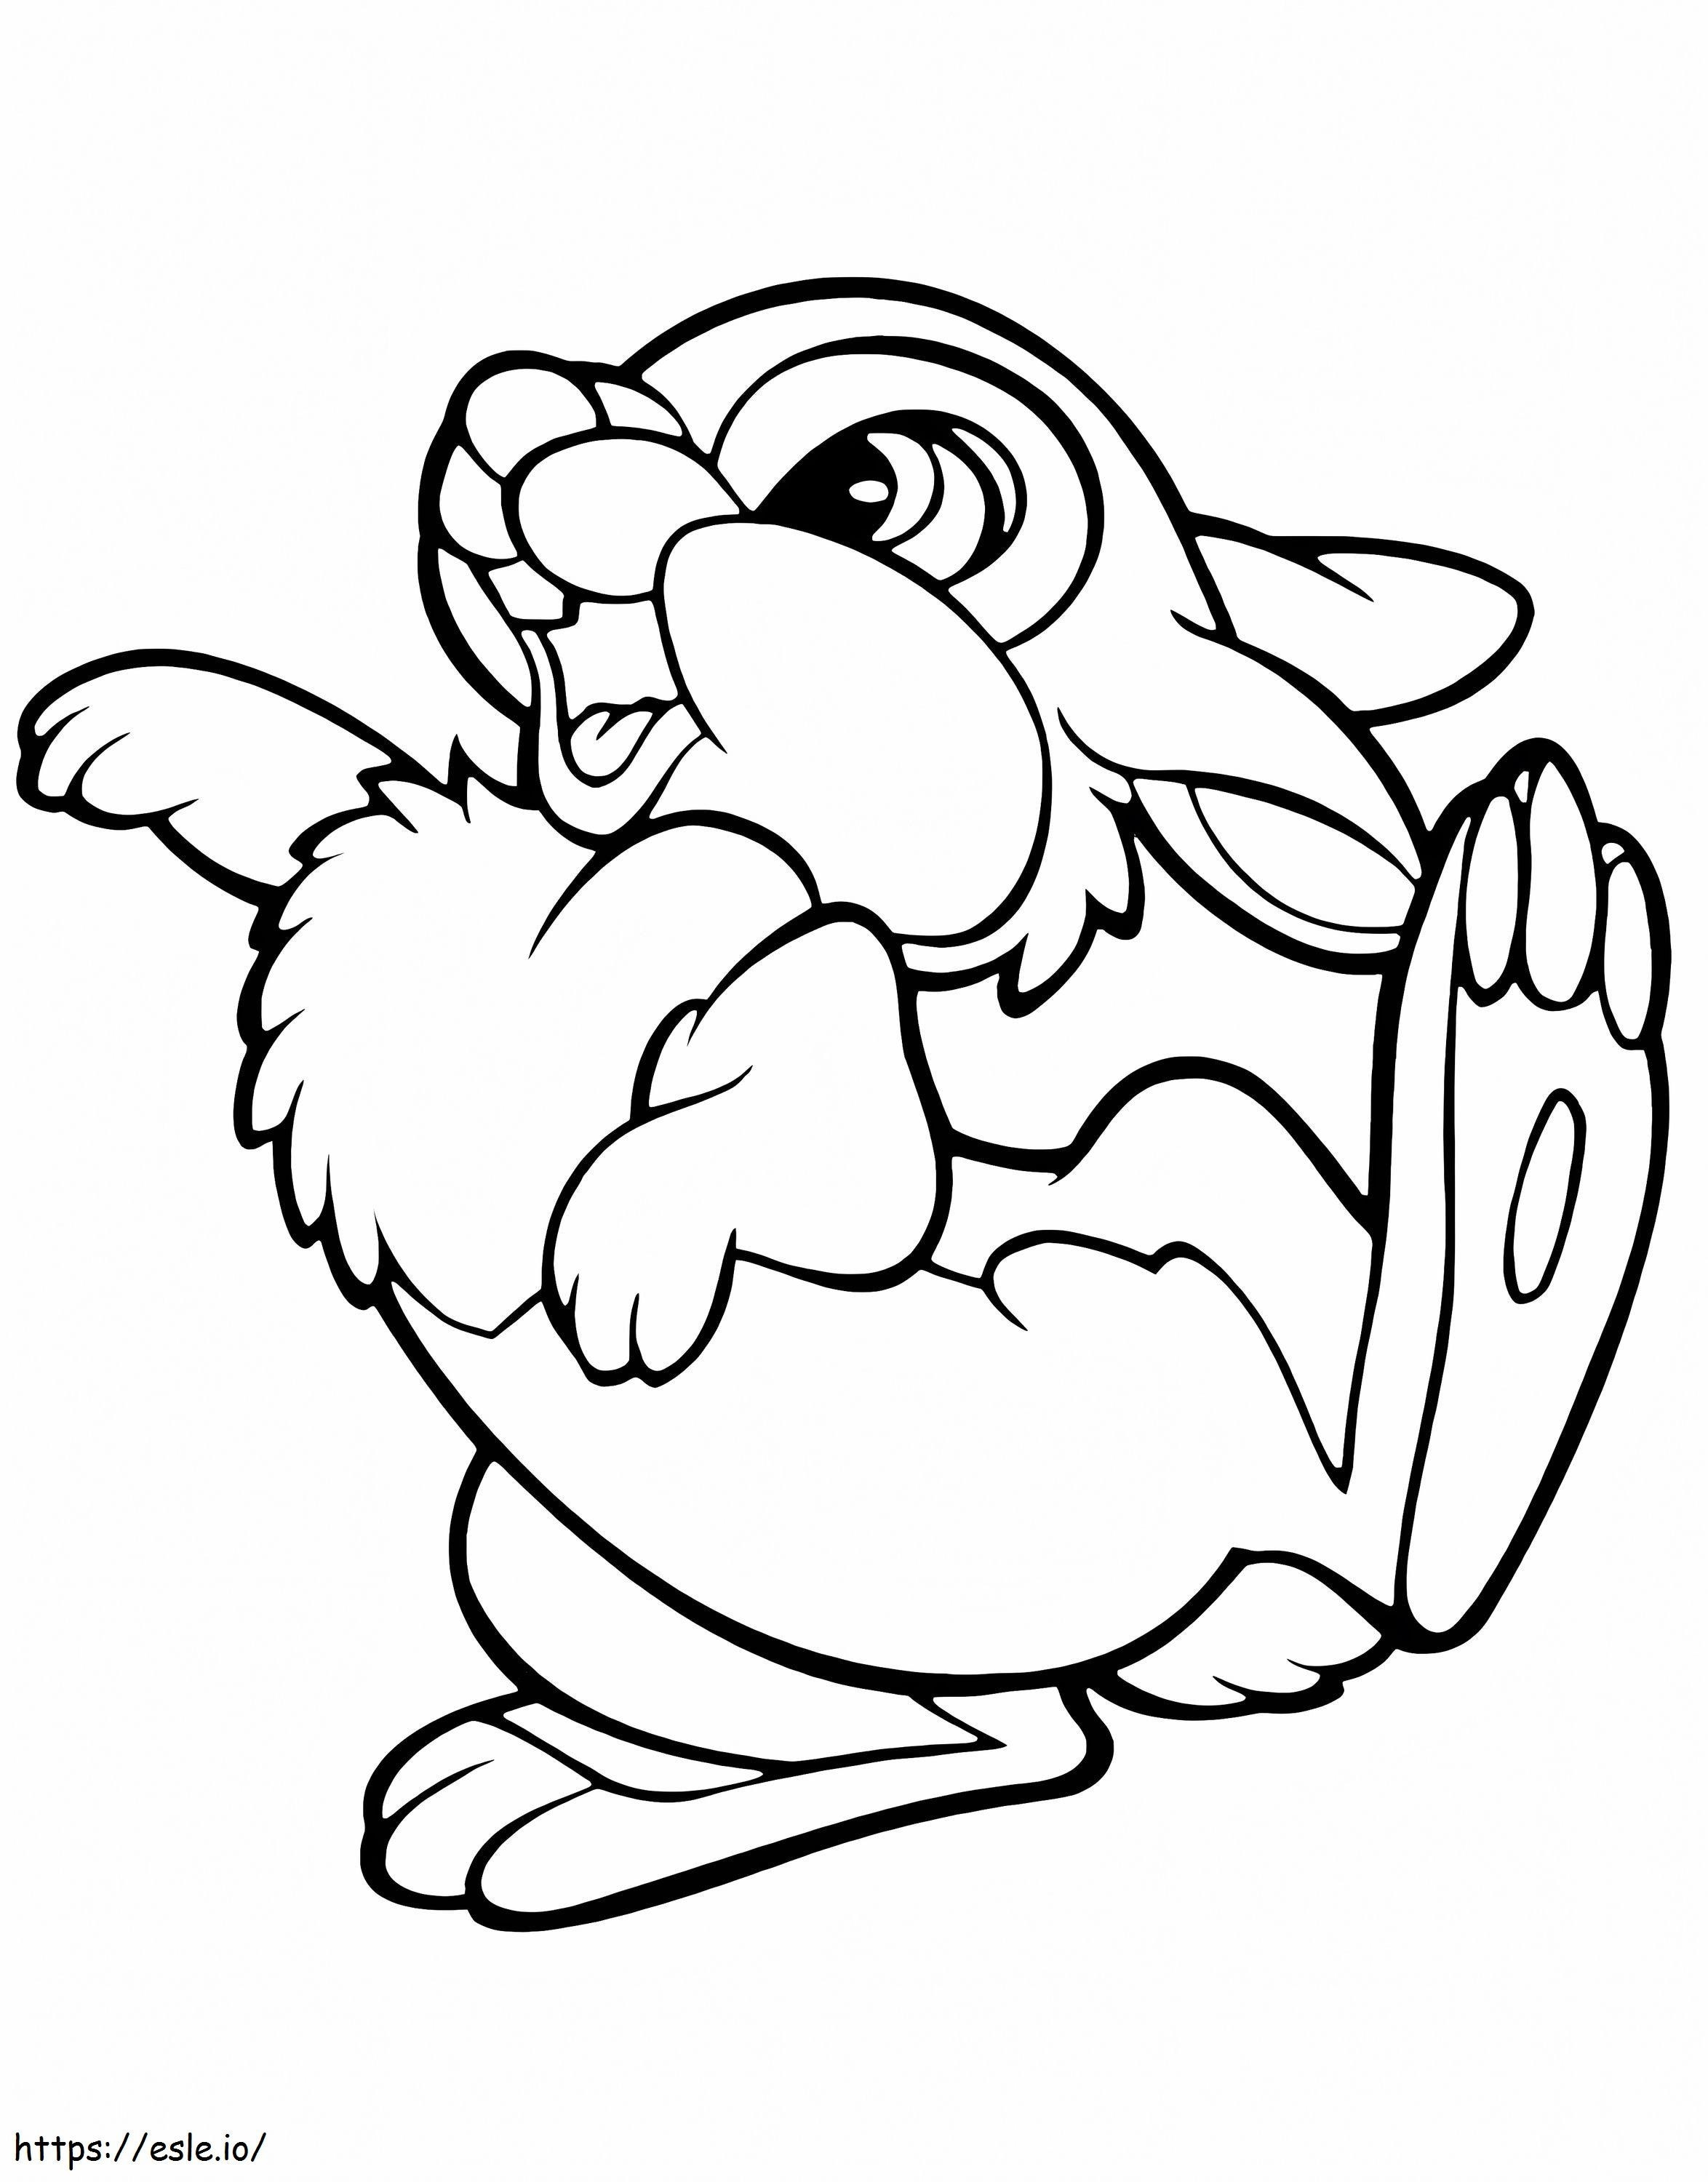 Disney Thumper Rabbit coloring page